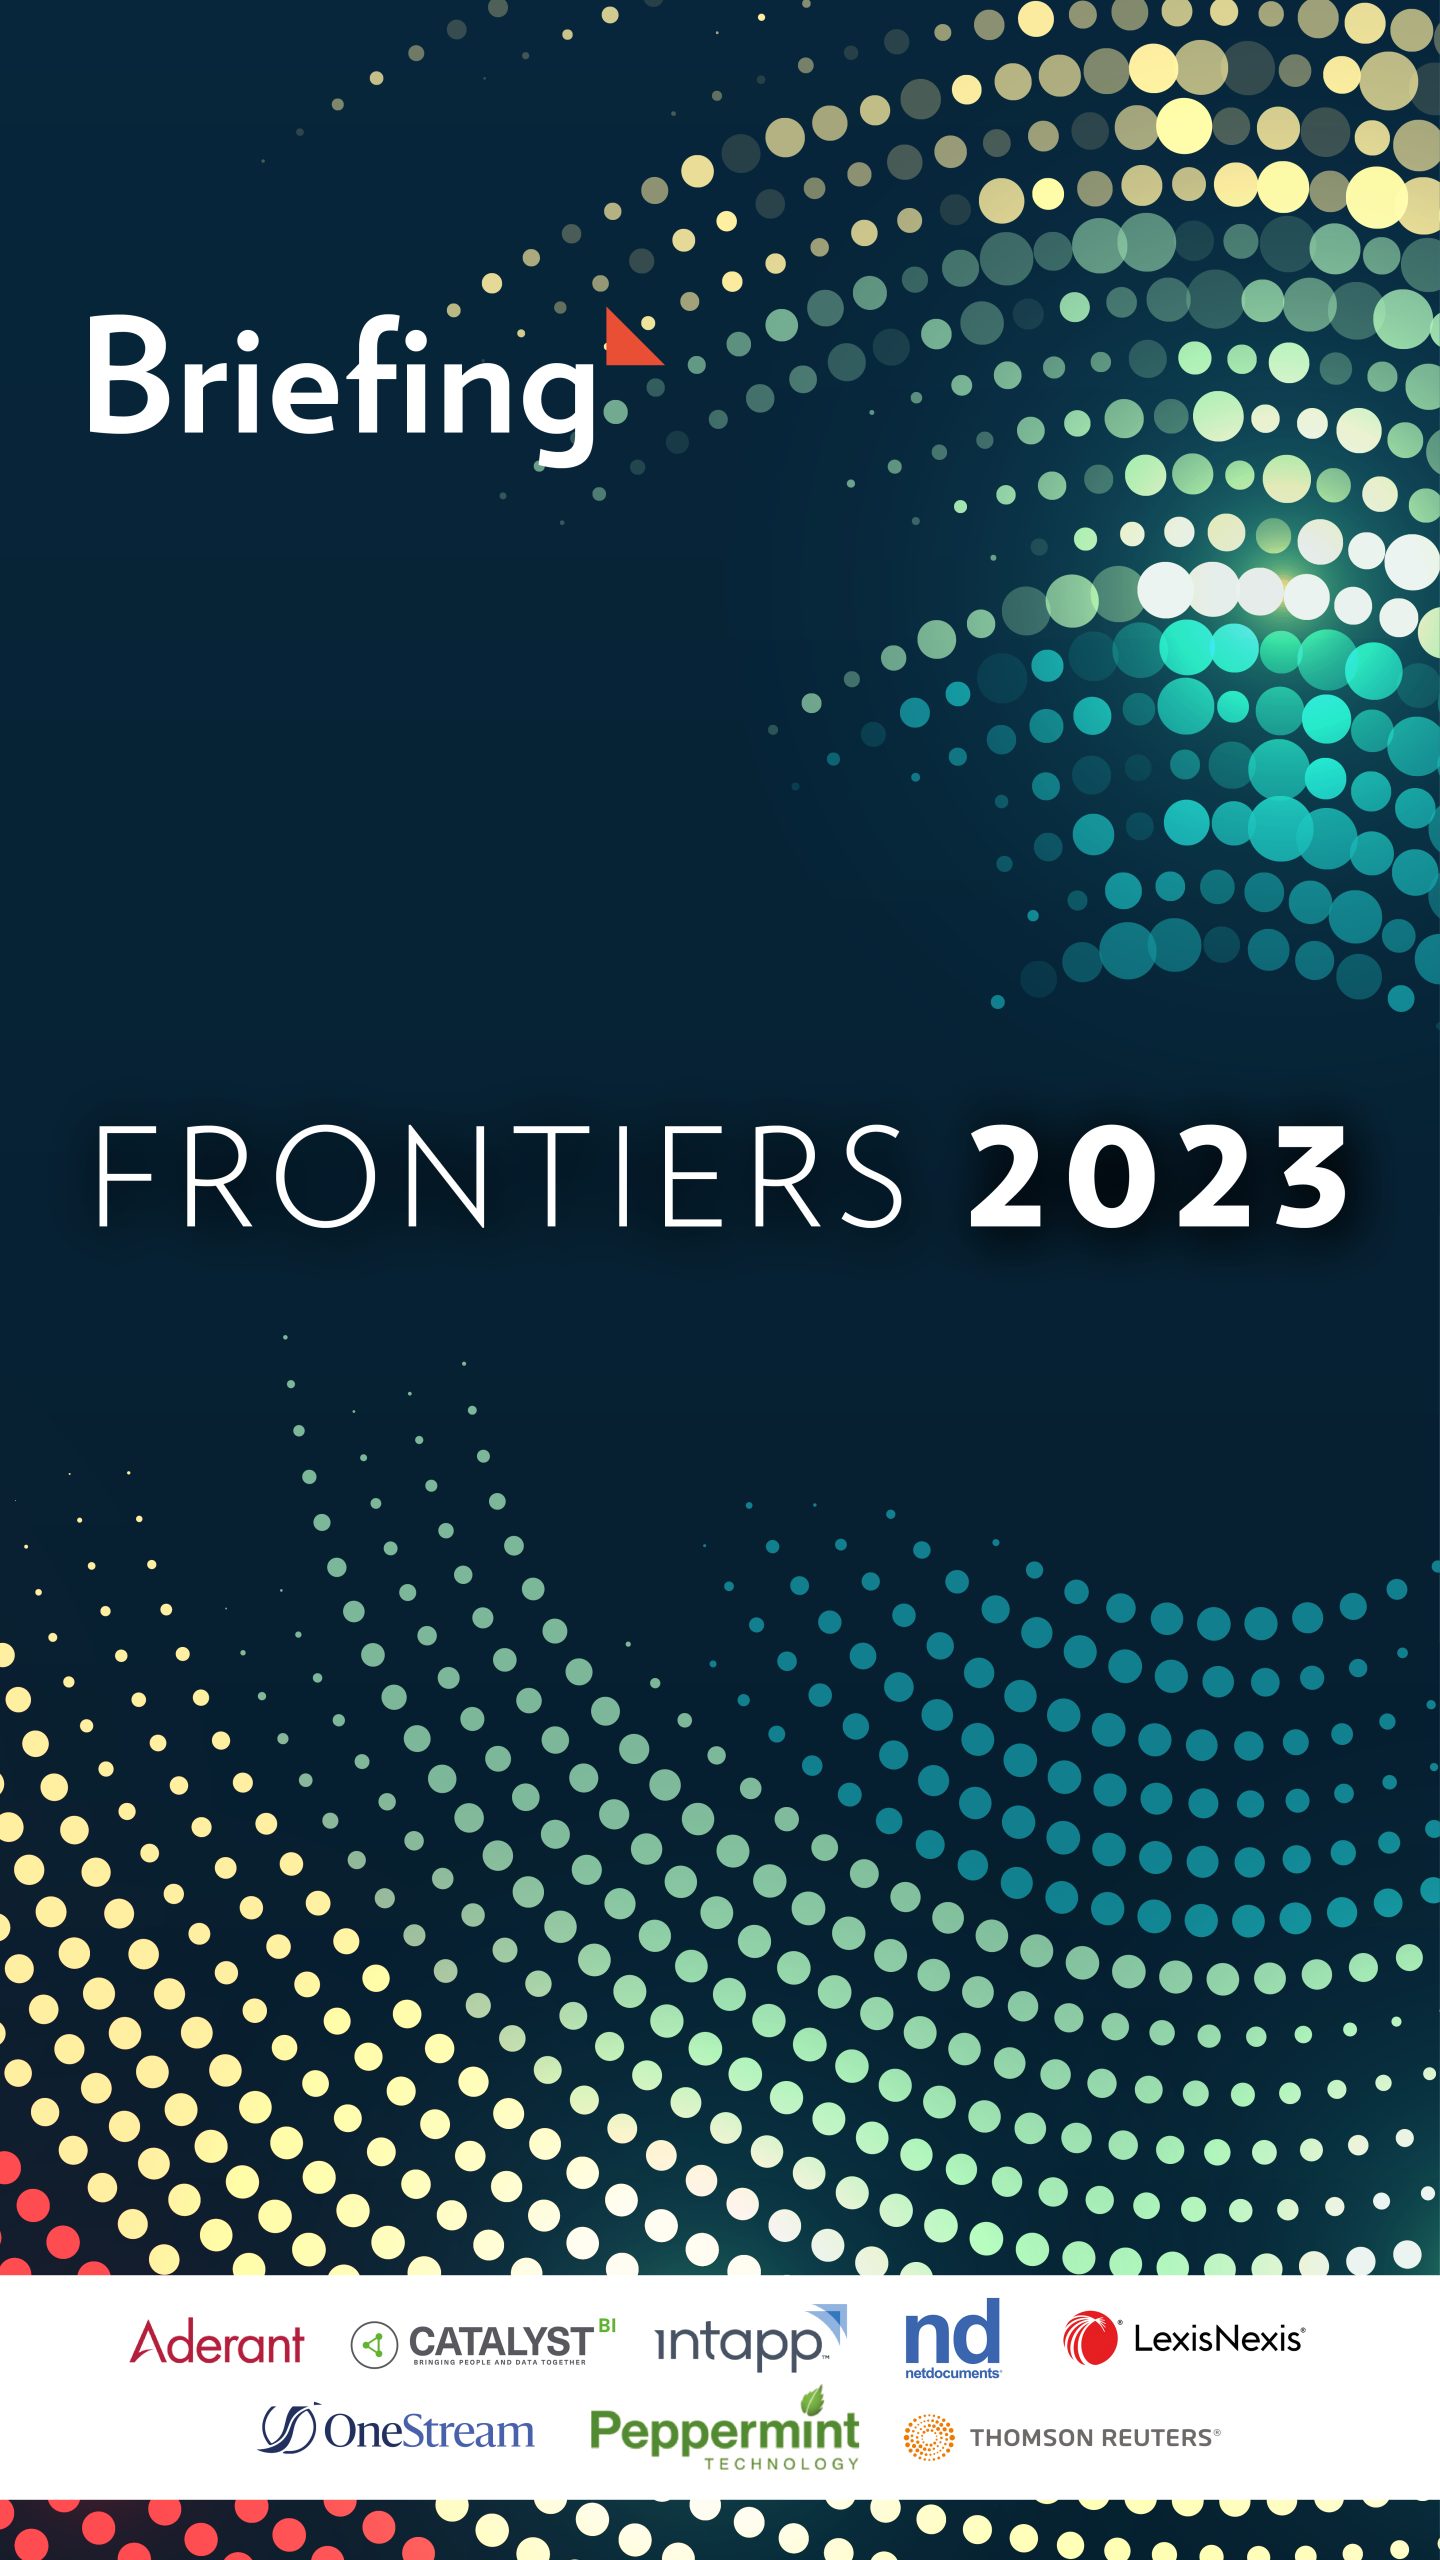 Briefing Frontiers 2023